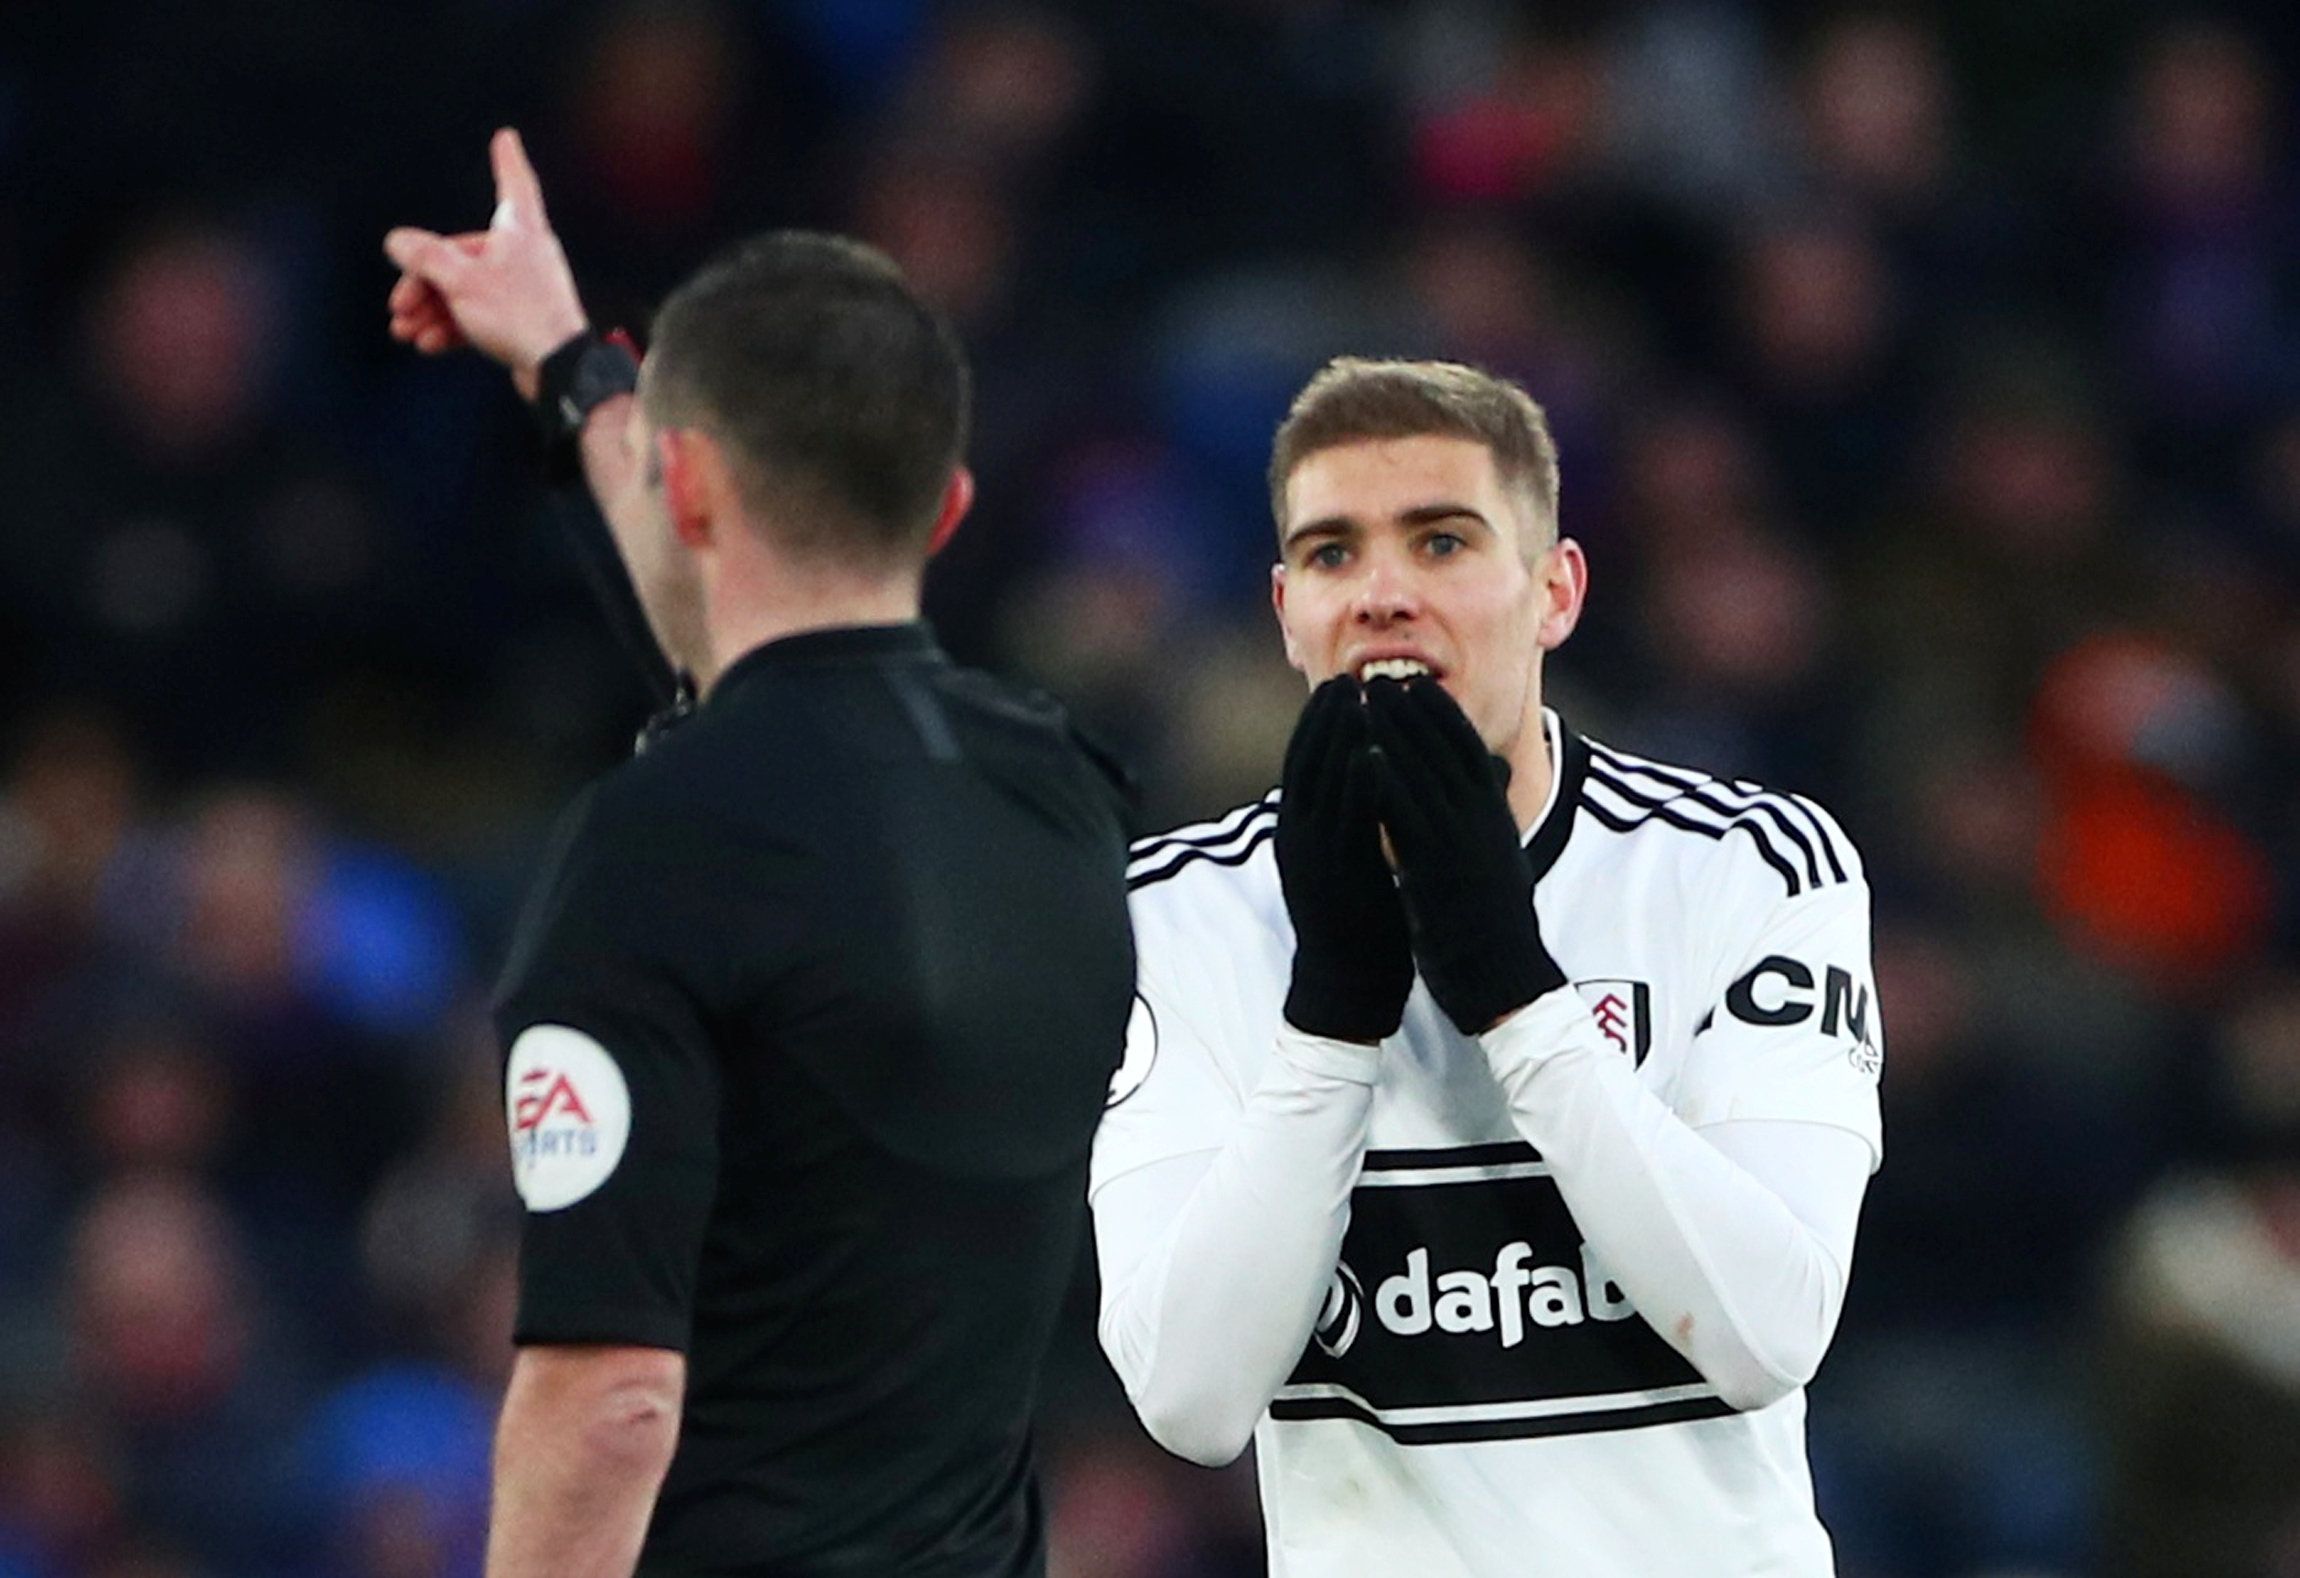 Soccer Football - Premier League - Crystal Palace v Fulham - Selhurst Park, London, Britain - February 2, 2019  Fulham's Maxime Le Marchand reacts after a decision by referee Michael Oliver  REUTERS/Hannah McKay  EDITORIAL USE ONLY. No use with unauthorized audio, video, data, fixture lists, club/league logos or "live" services. Online in-match use limited to 75 images, no video emulation. No use in betting, games or single club/league/player publications.  Please contact your account representa